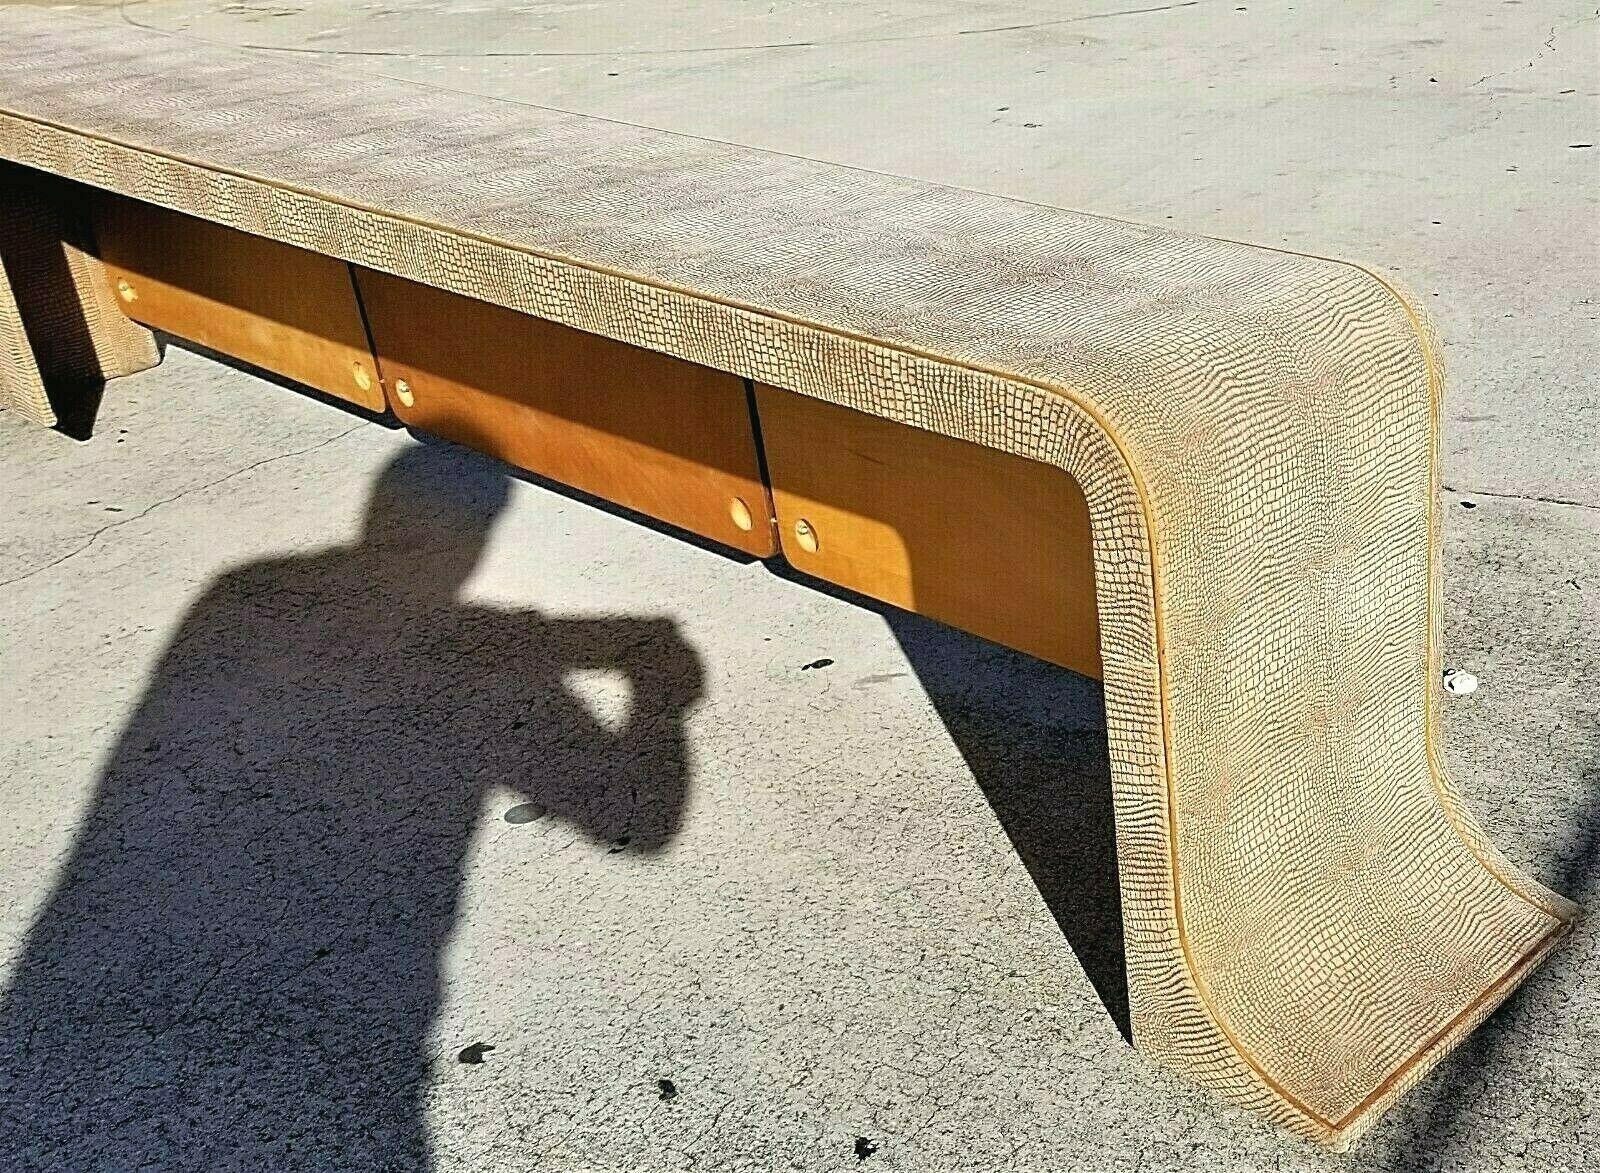 For FULL item description click on CONTINUE READING at the bottom of this page.

Offering One Of Our Recent Palm Beach Estate Fine Furniture Acquisitions Of A
Huge 10 foot Dunbar custom made Mid-Century Modern upholstered L shaped bench
